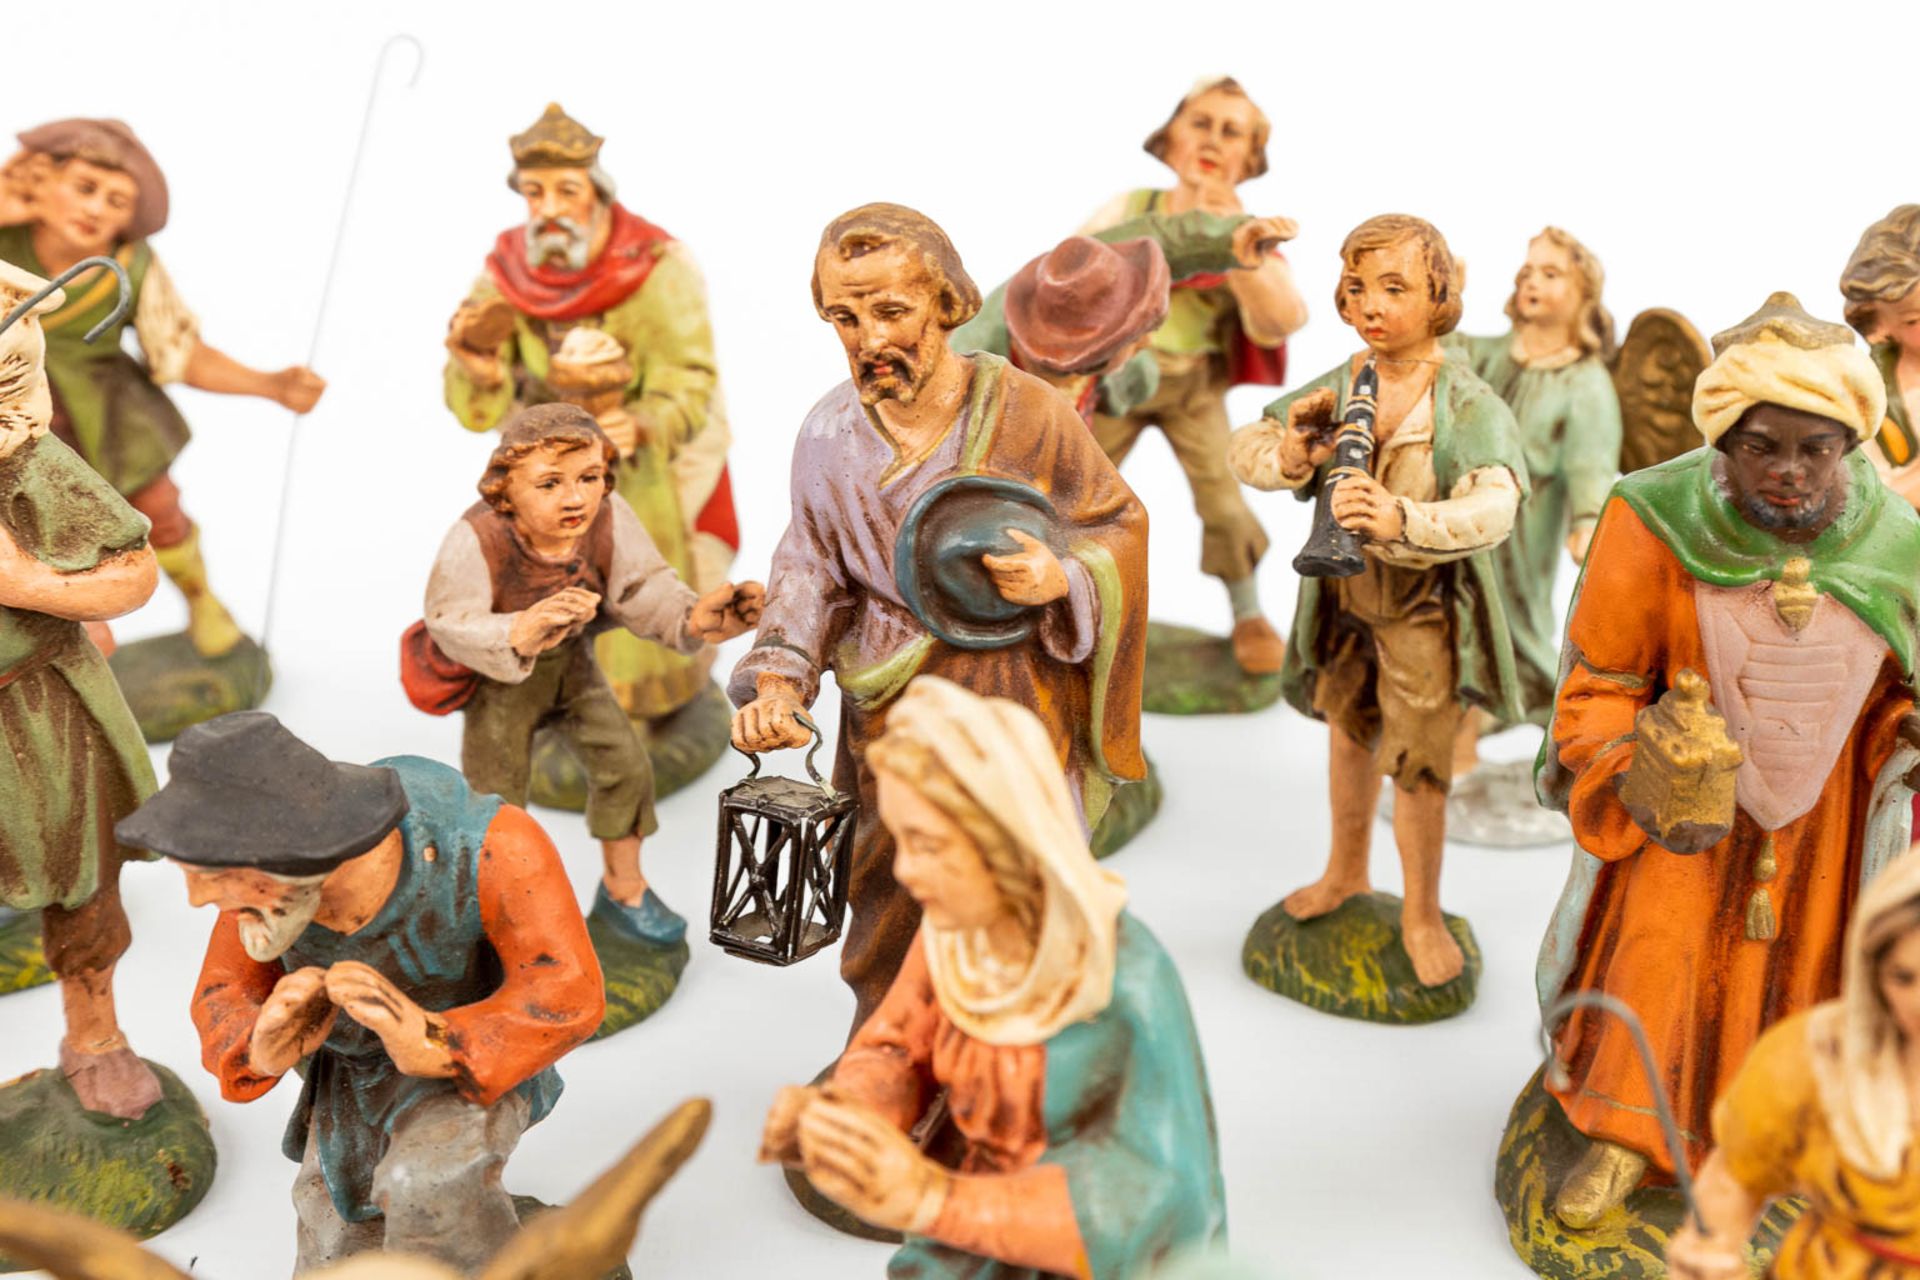 A large and extended Nativity scene with figurines and animals made of papier maché. - Image 18 of 20